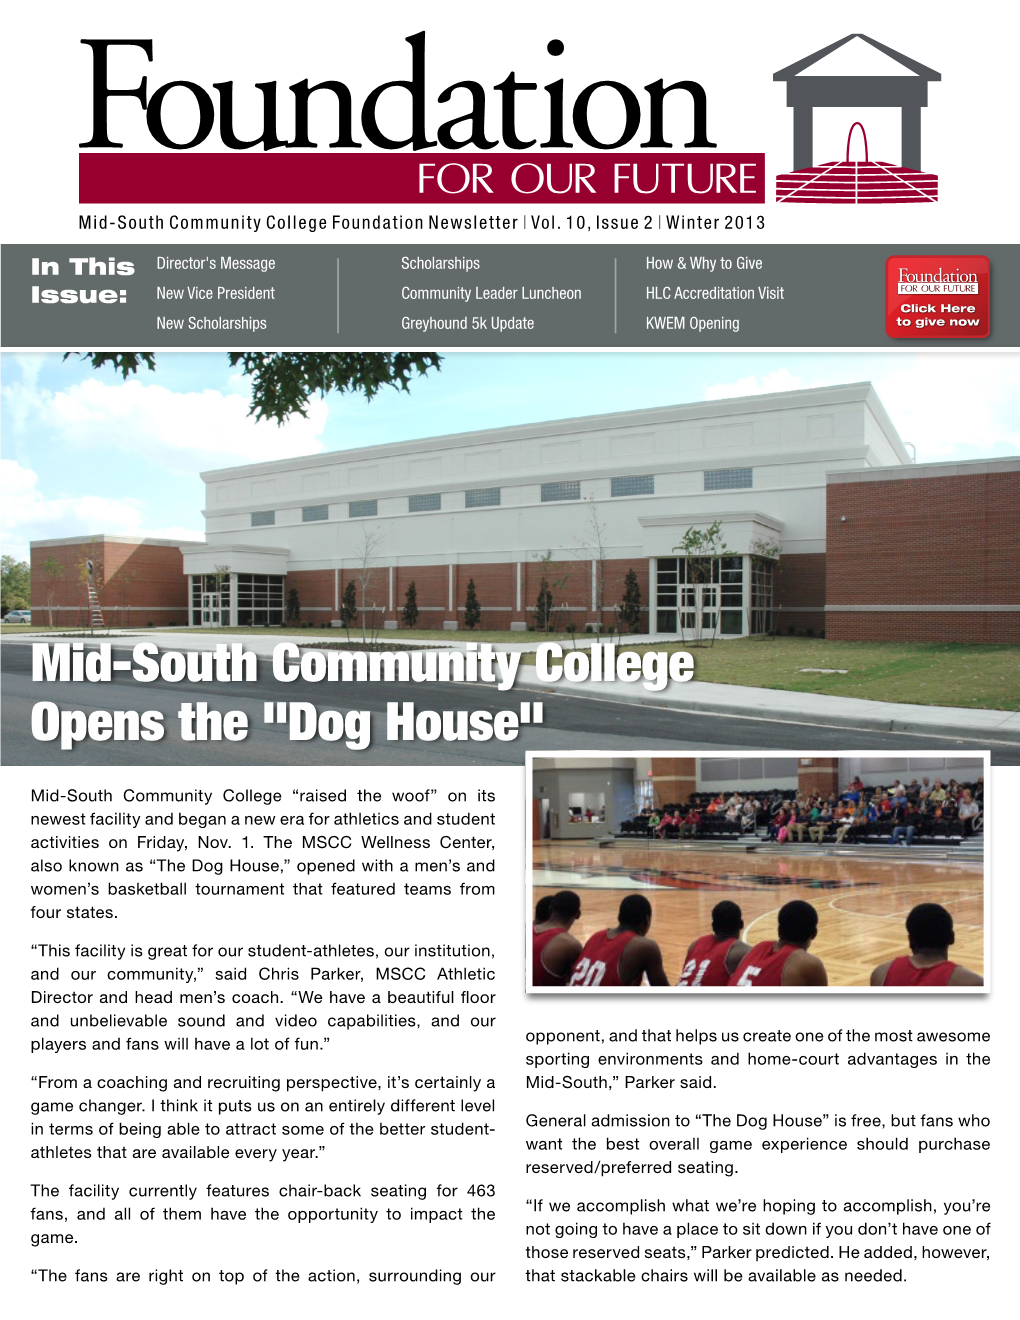 Mid-South Community College Opens the "Dog House"